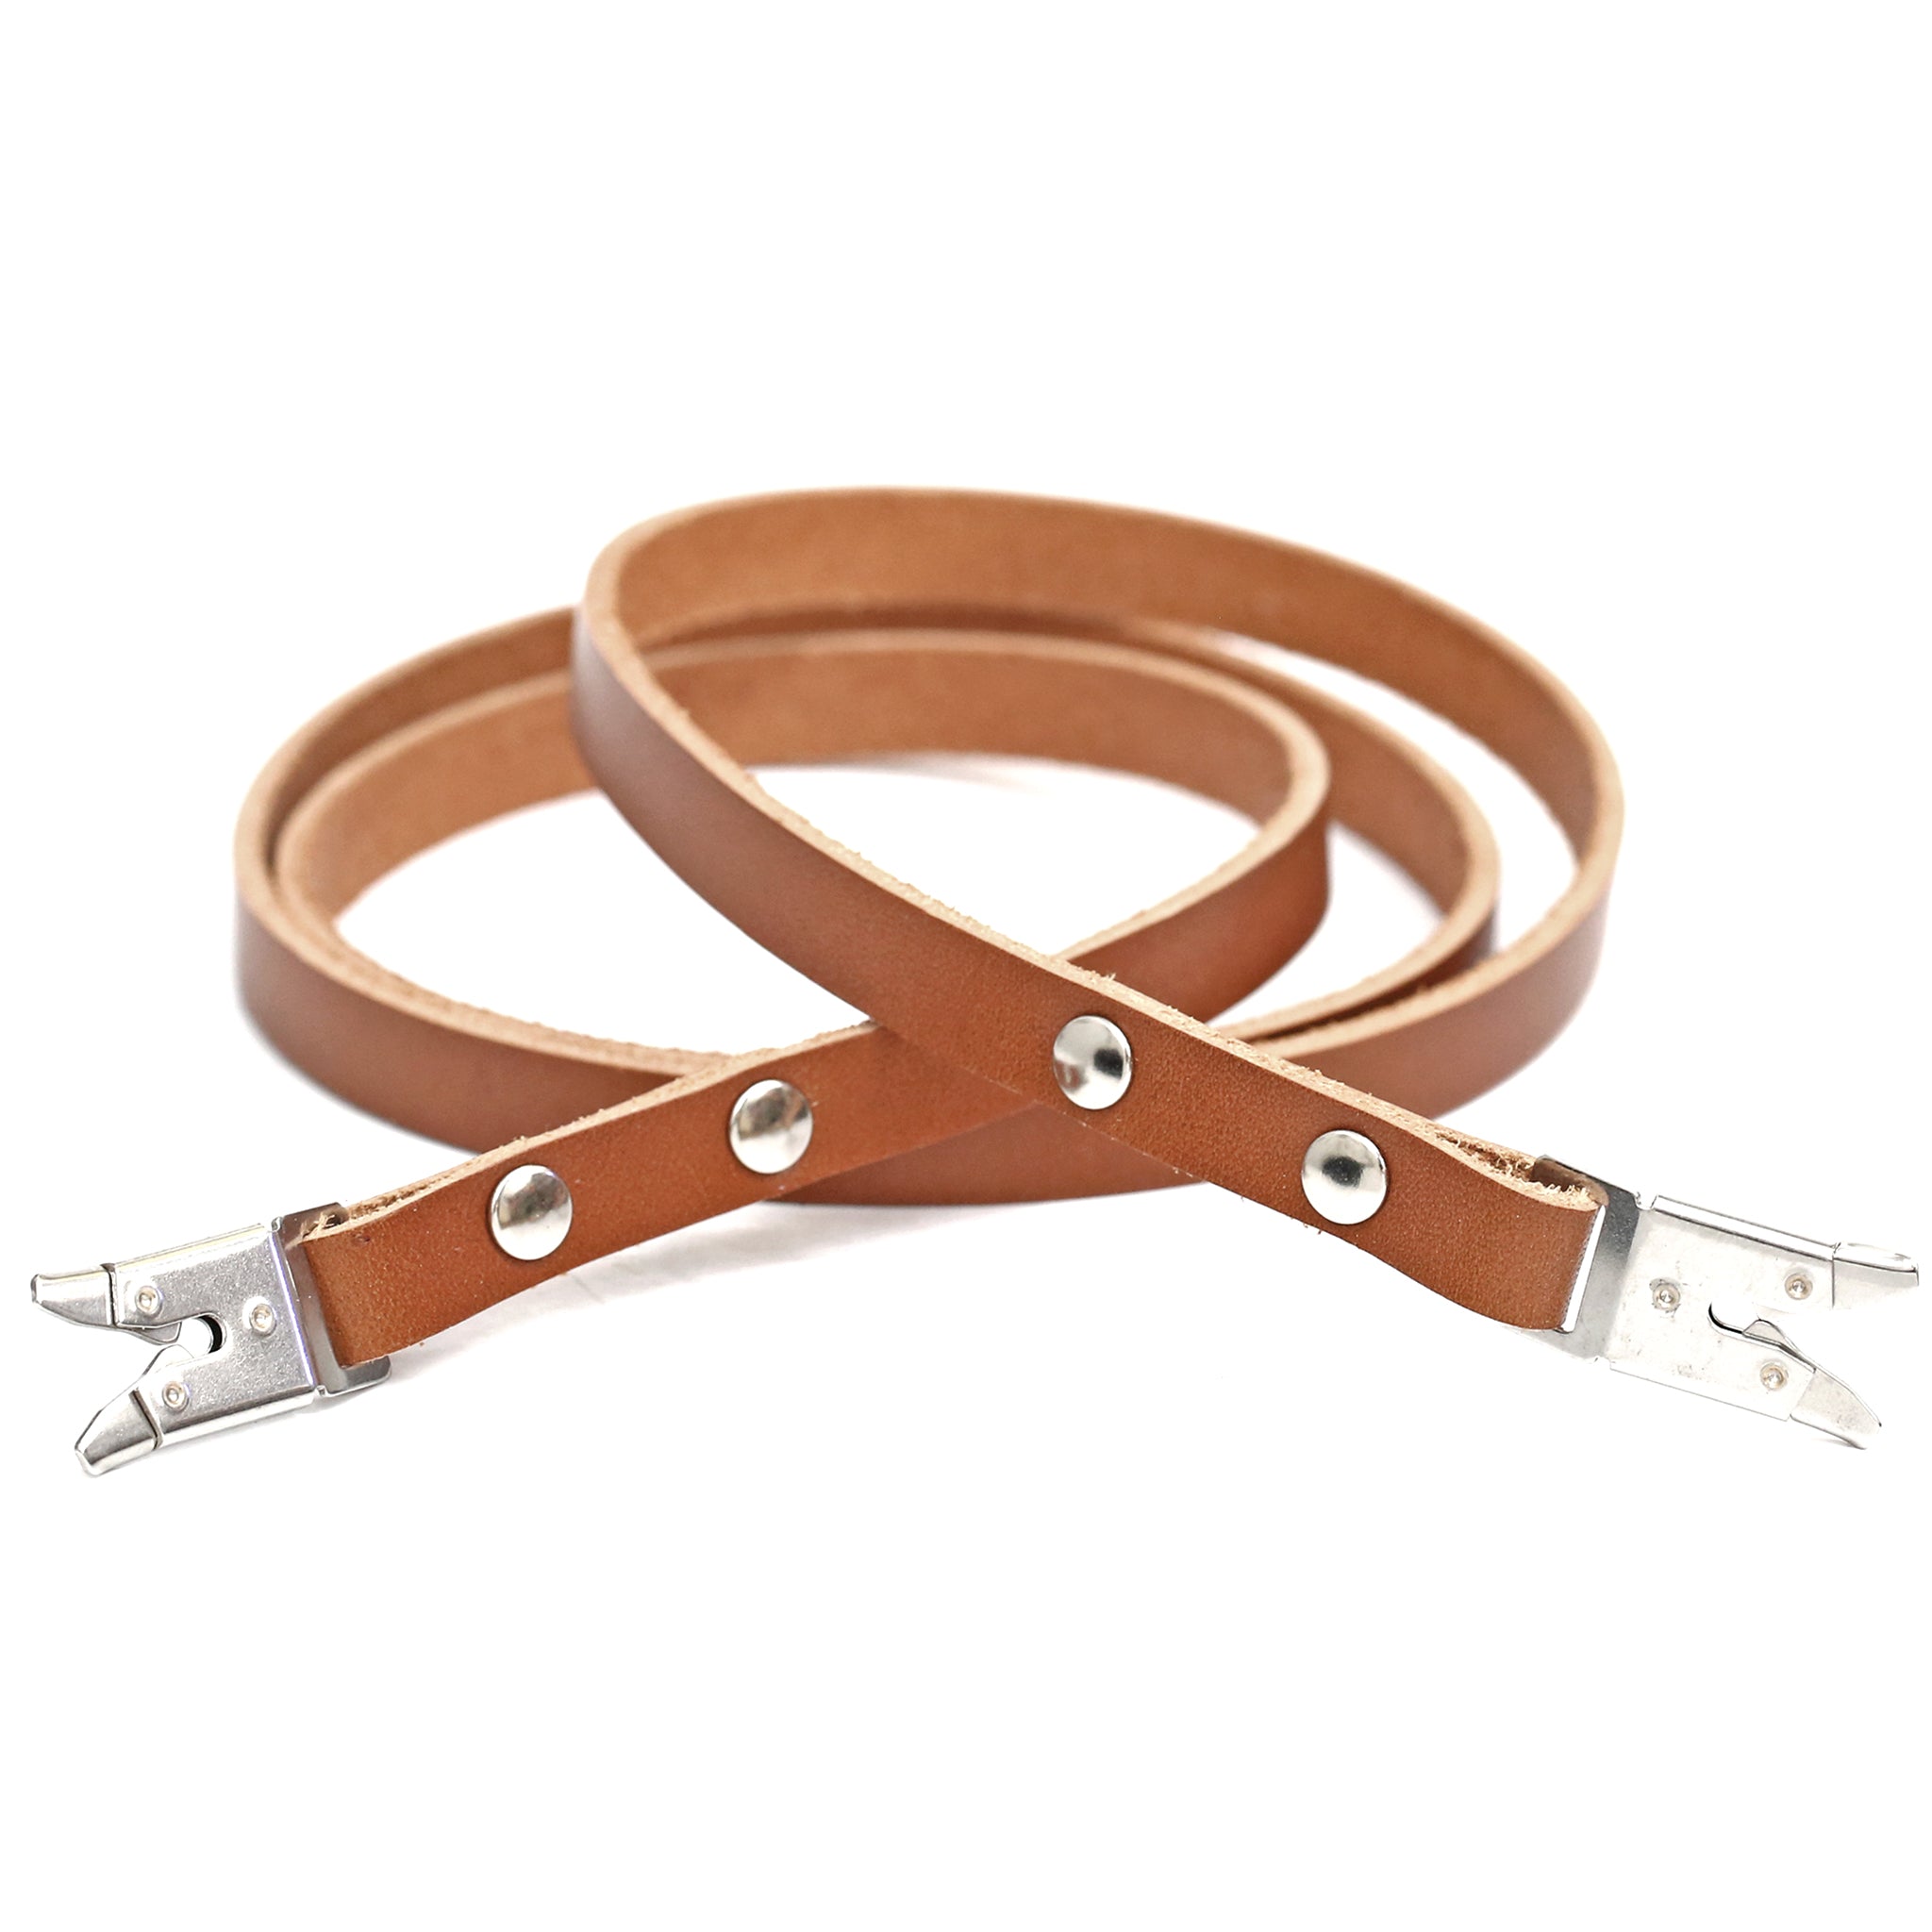 Camera strap in cognac leather, for Rolleiflex, 100cm